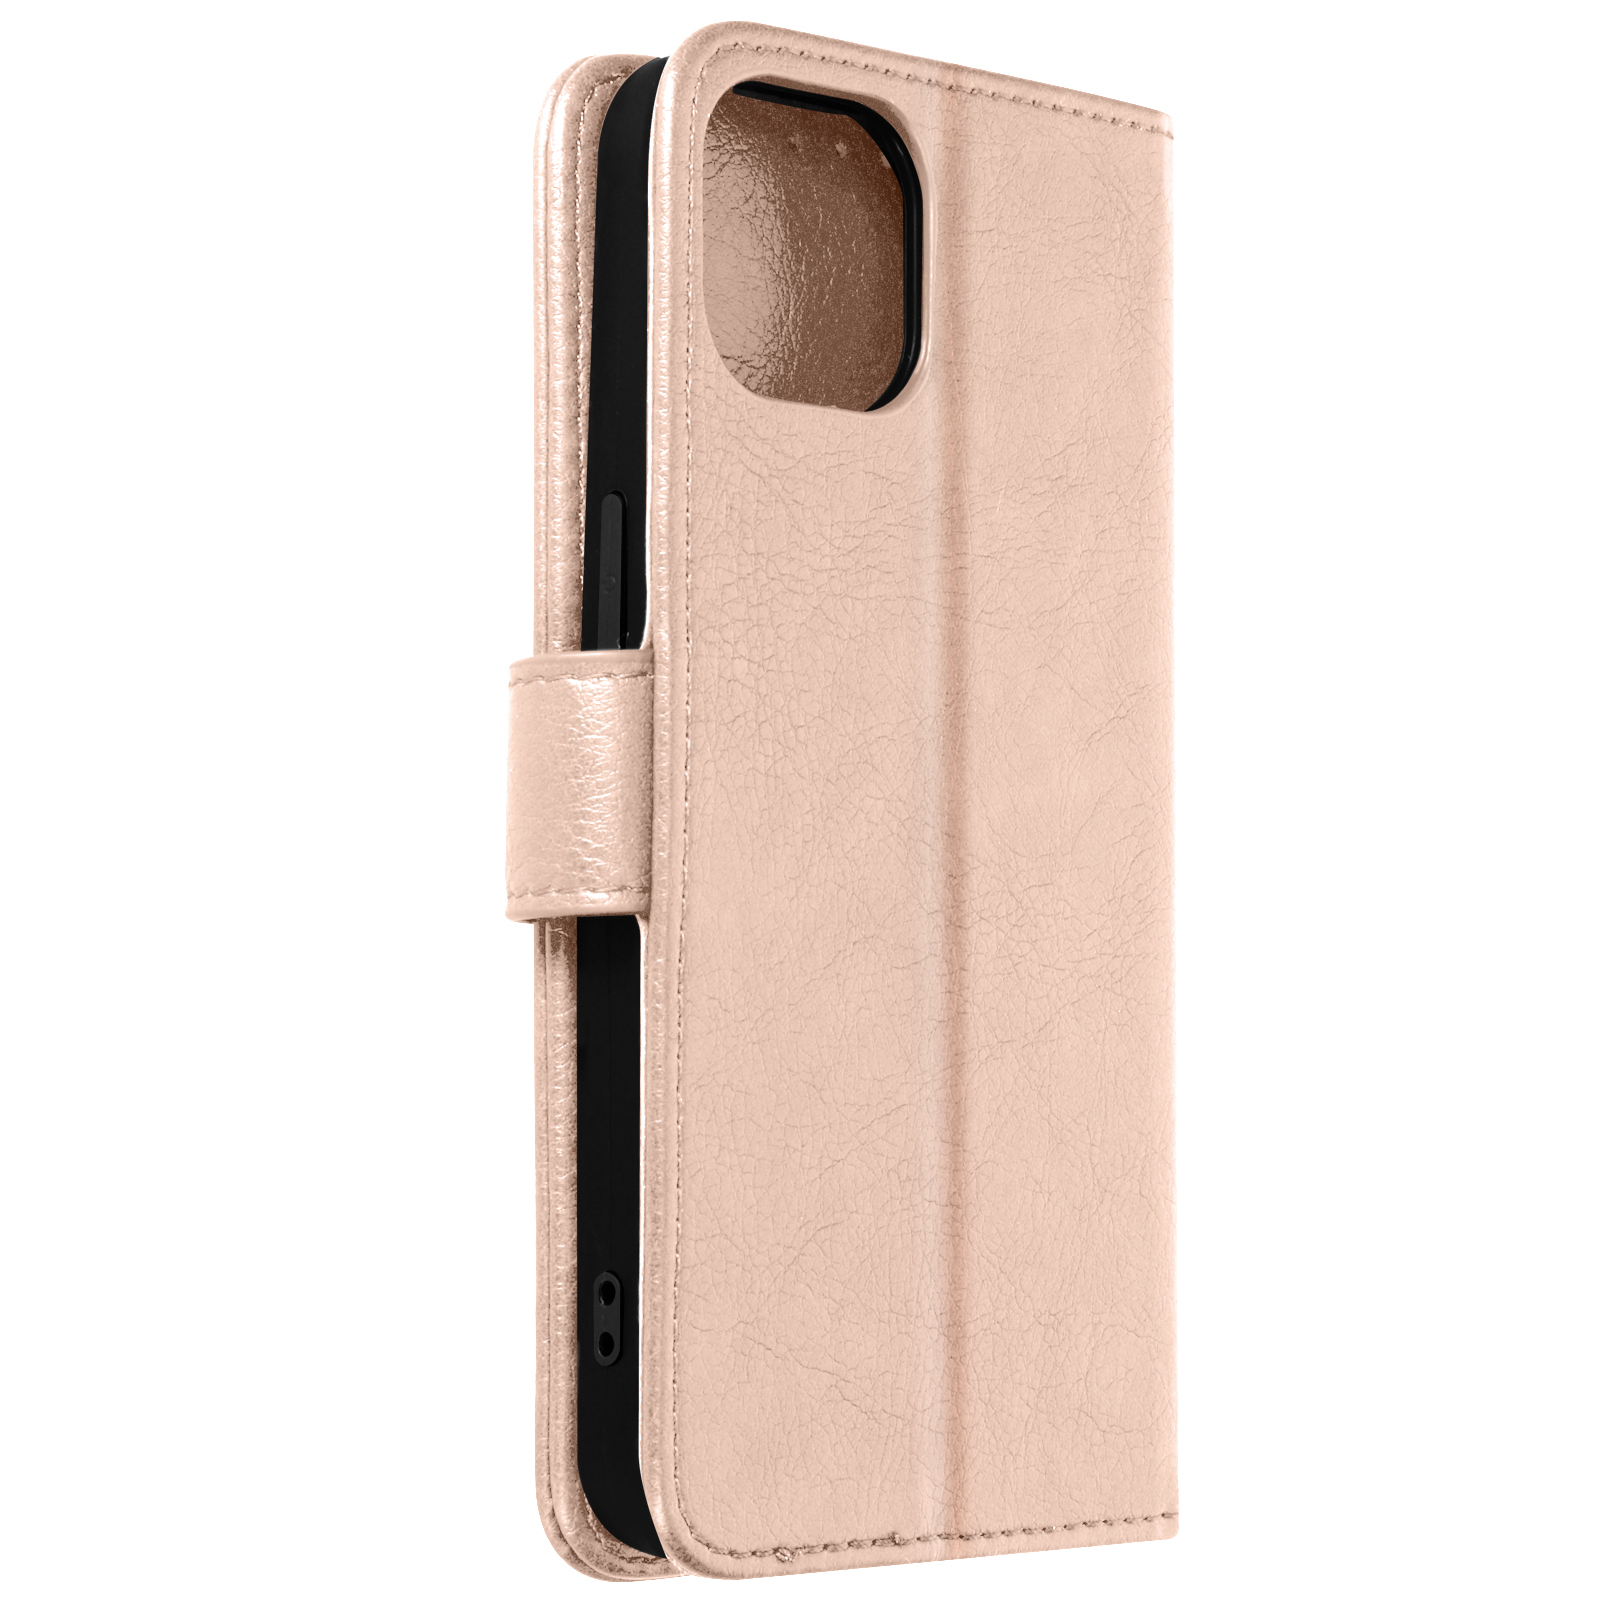 Series, Rosegold AVIZAR Bookcover, Apple, Pro 13 Chesterfield iPhone Max,